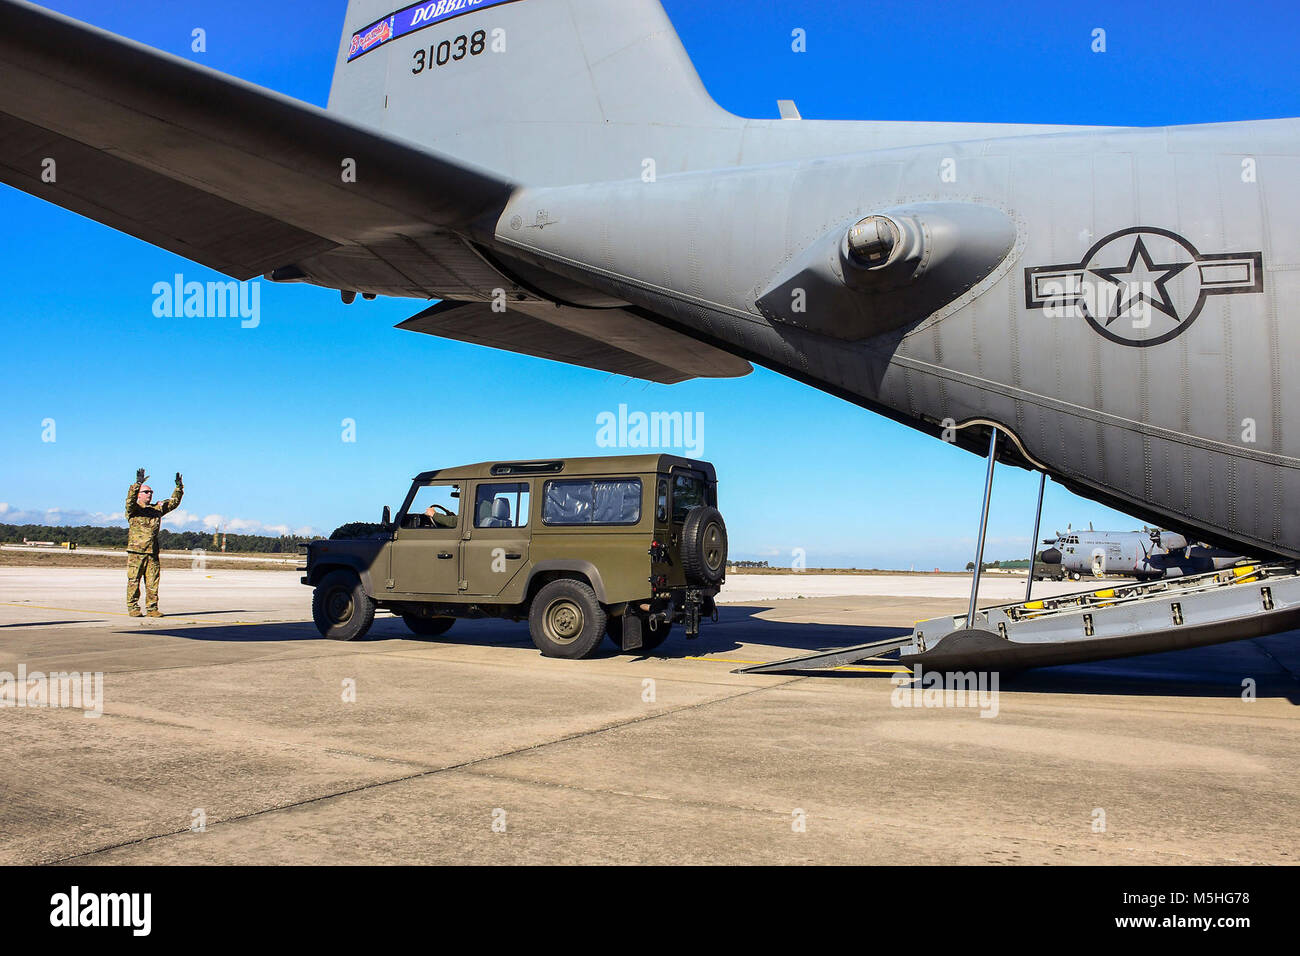 Tech. Sgt. Michael Hoffman, a 700th Airlift Squadron loadmaster, guides a vehicle into the back of a C-130H3 Hercules on the flightline at Monte Real Air Base, Portugal, on Feb. 5, 2018. Loadmasters on the plane worked quickly to secure the vehicle before taking off and heading to the landing zone where they offloaded the vehicle driven by Portuguese navy special forces as part of Real Thaw 18, a Portuguese-led exercise involving several NATO countries working together to perform realistic tasks both in the air and on the ground. (U.S. Air Force Stock Photo